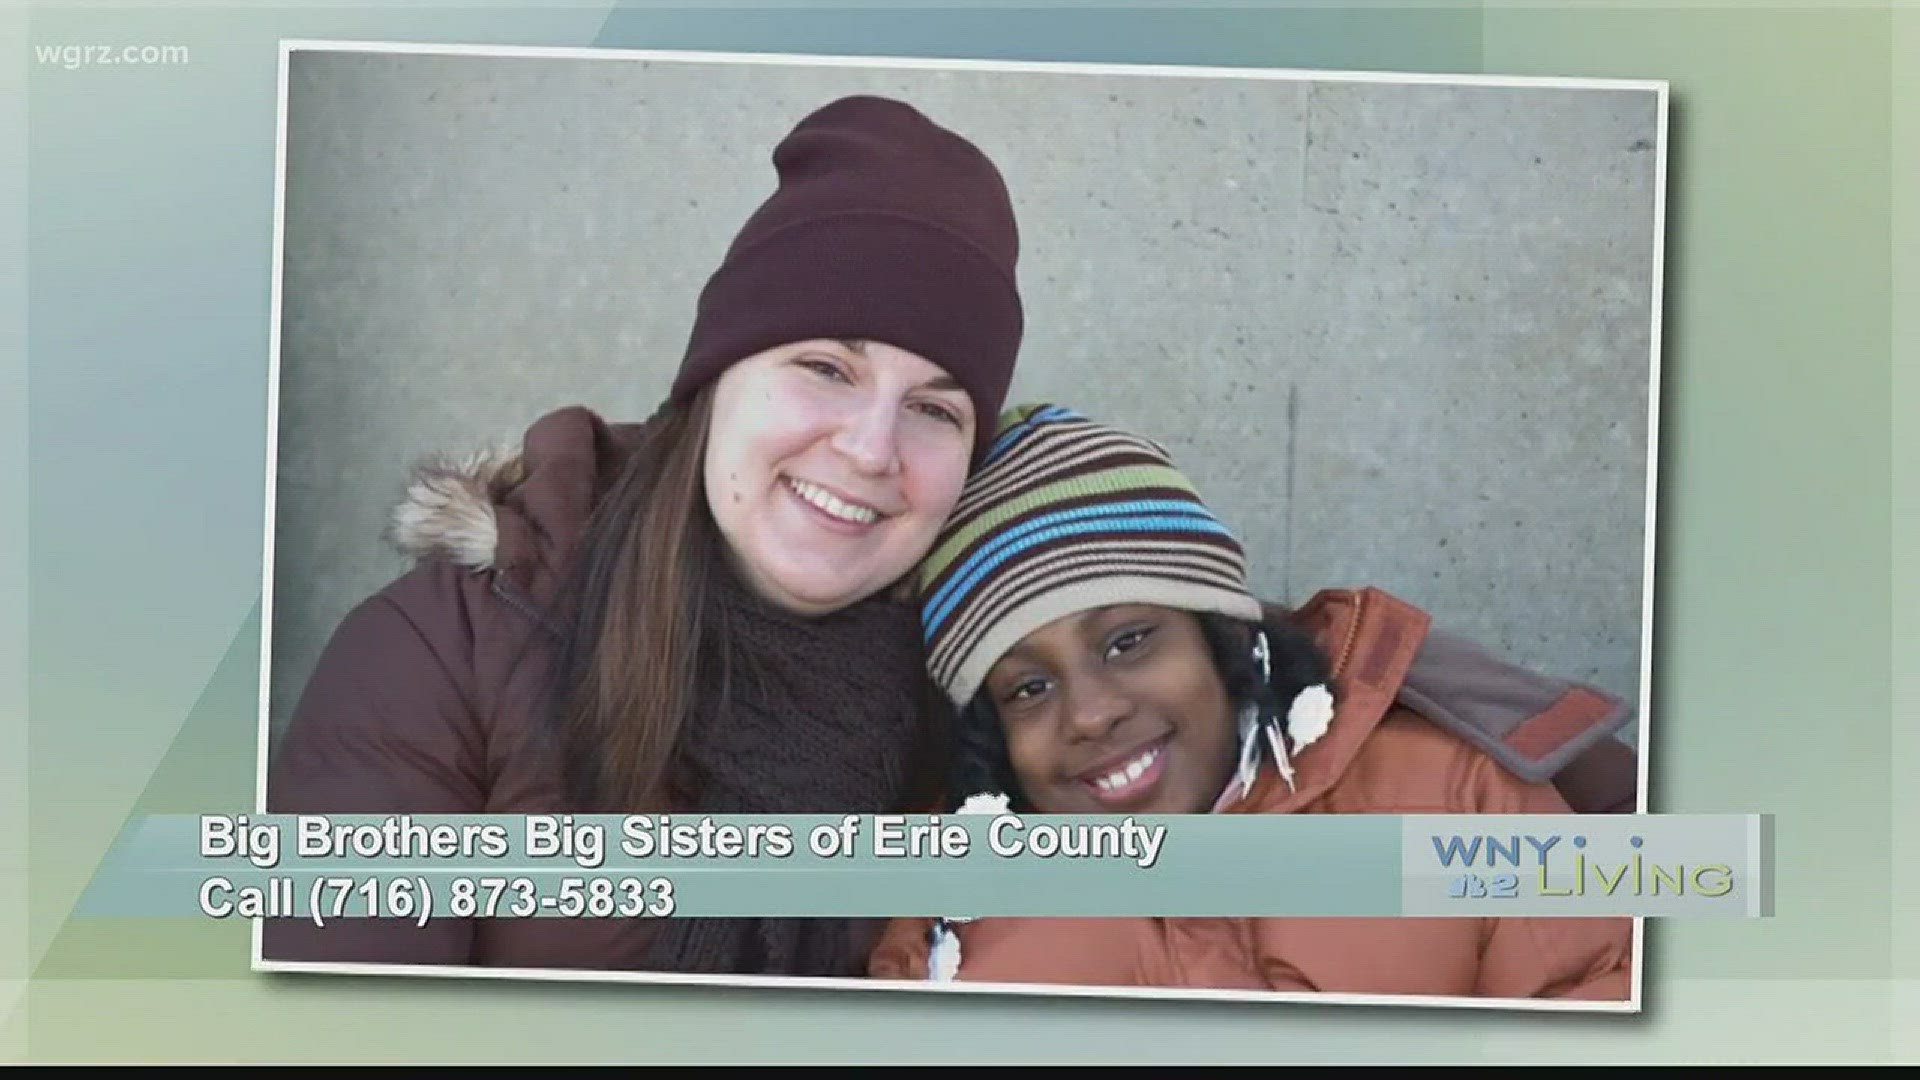 WNY Living - January 6 - Big Brothers Big Sisters of Erie County